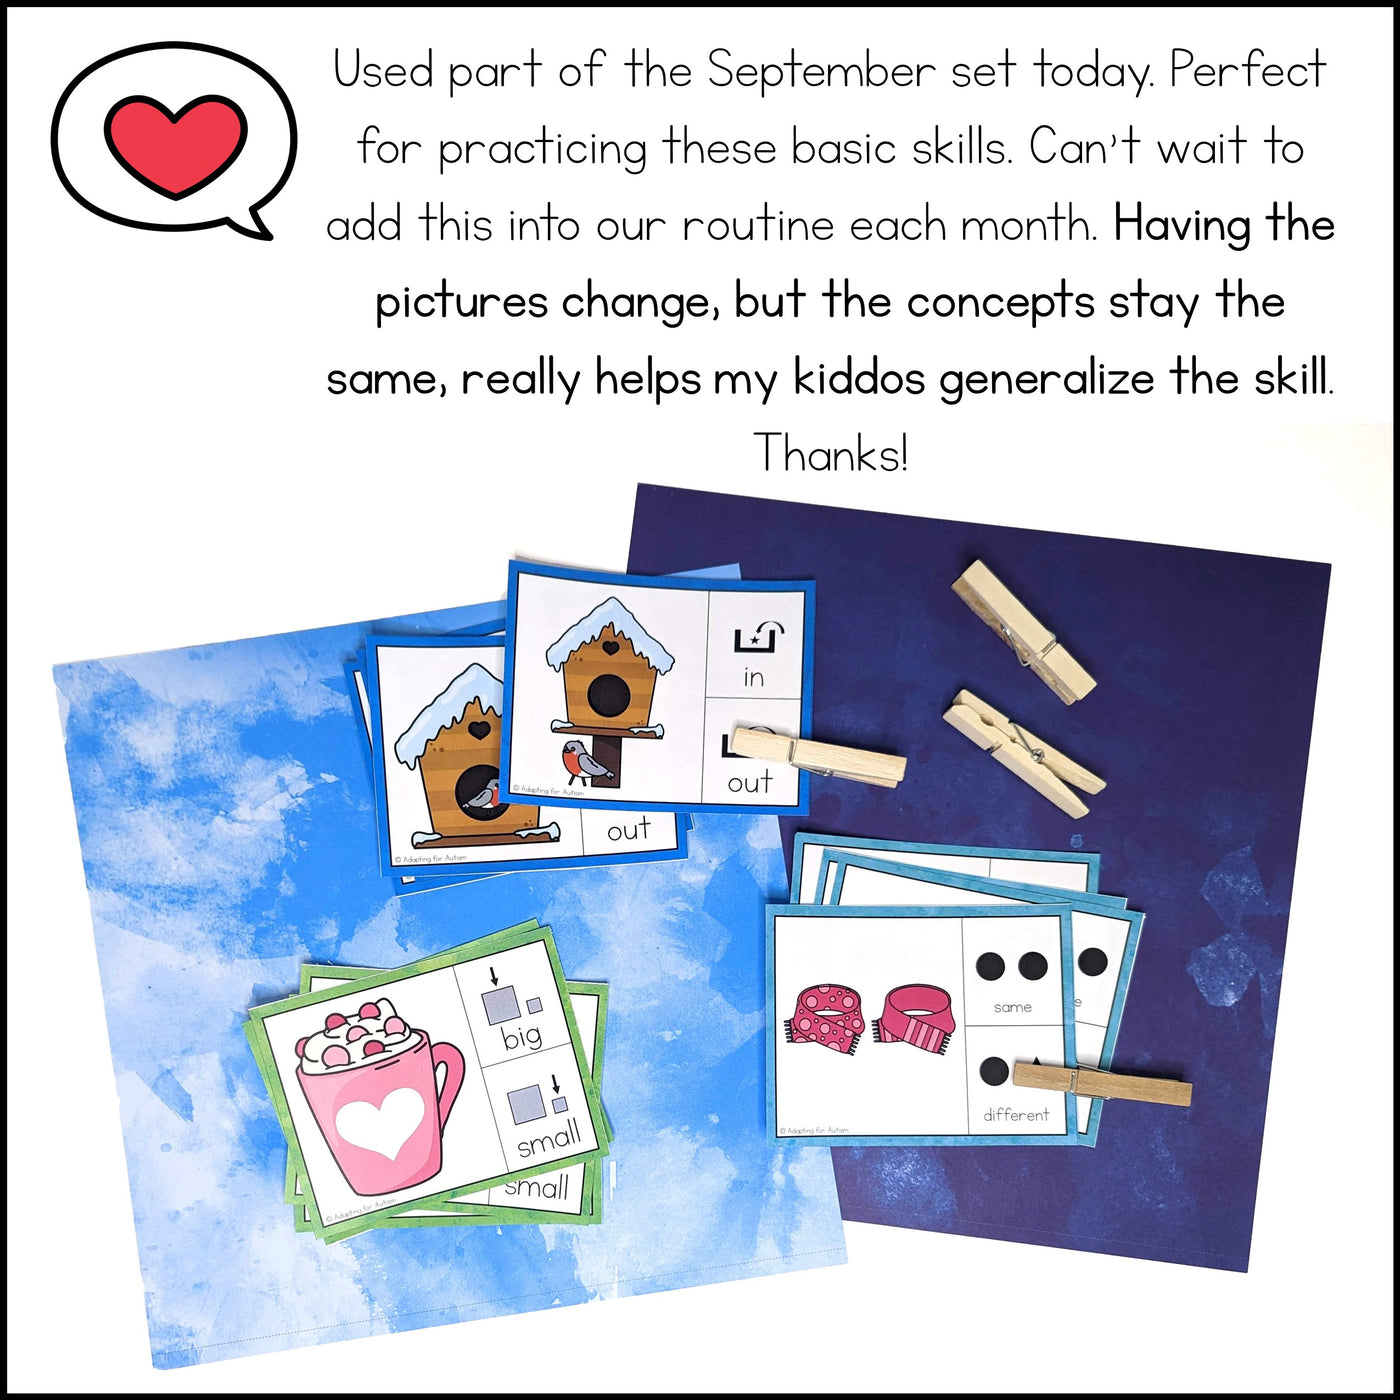 Calendar Days of the Week Task Cards Activities for Special Education Task  Boxes - Classful